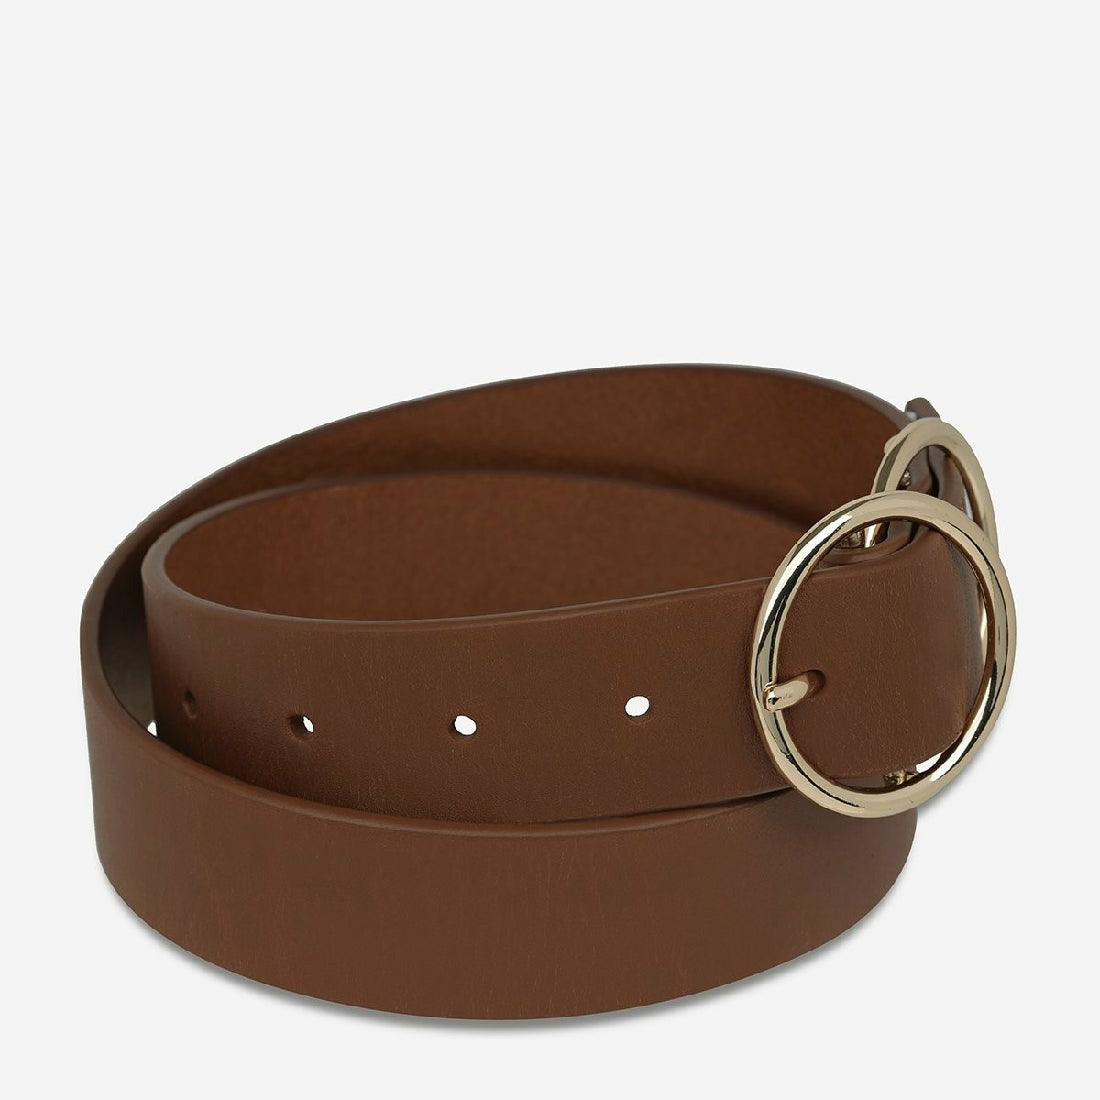 Status Anxiety Mislaid Belt - Little Extras Lifestyle Boutique